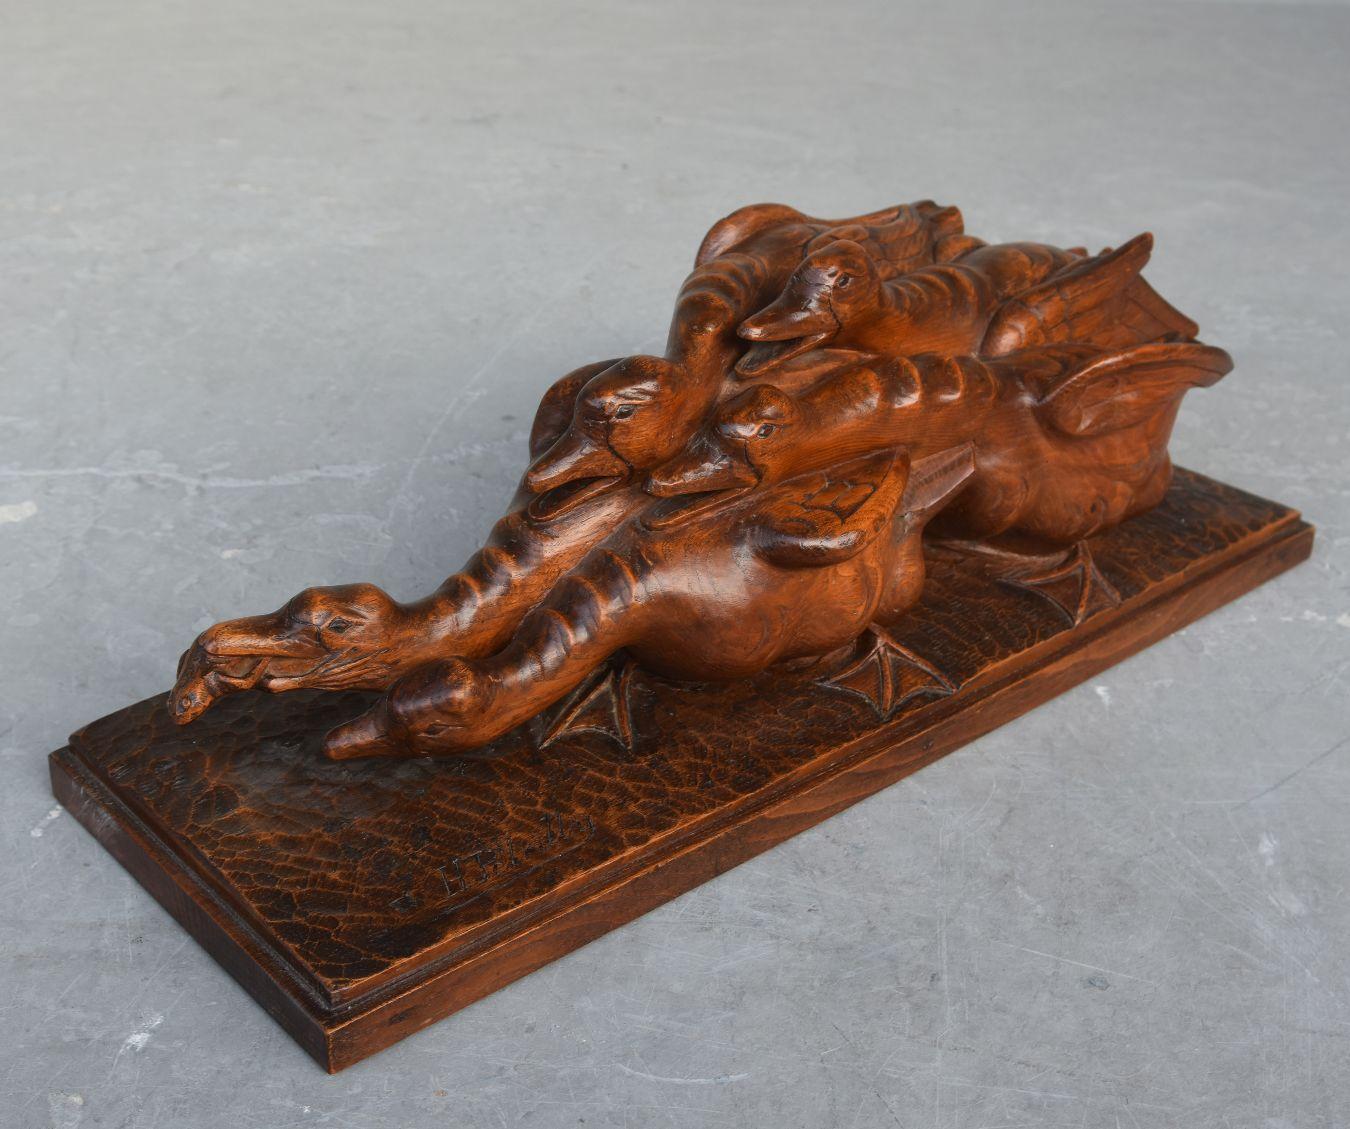 1930s wooden sculpture representing Geese fighting over a frog by H Petrilly.